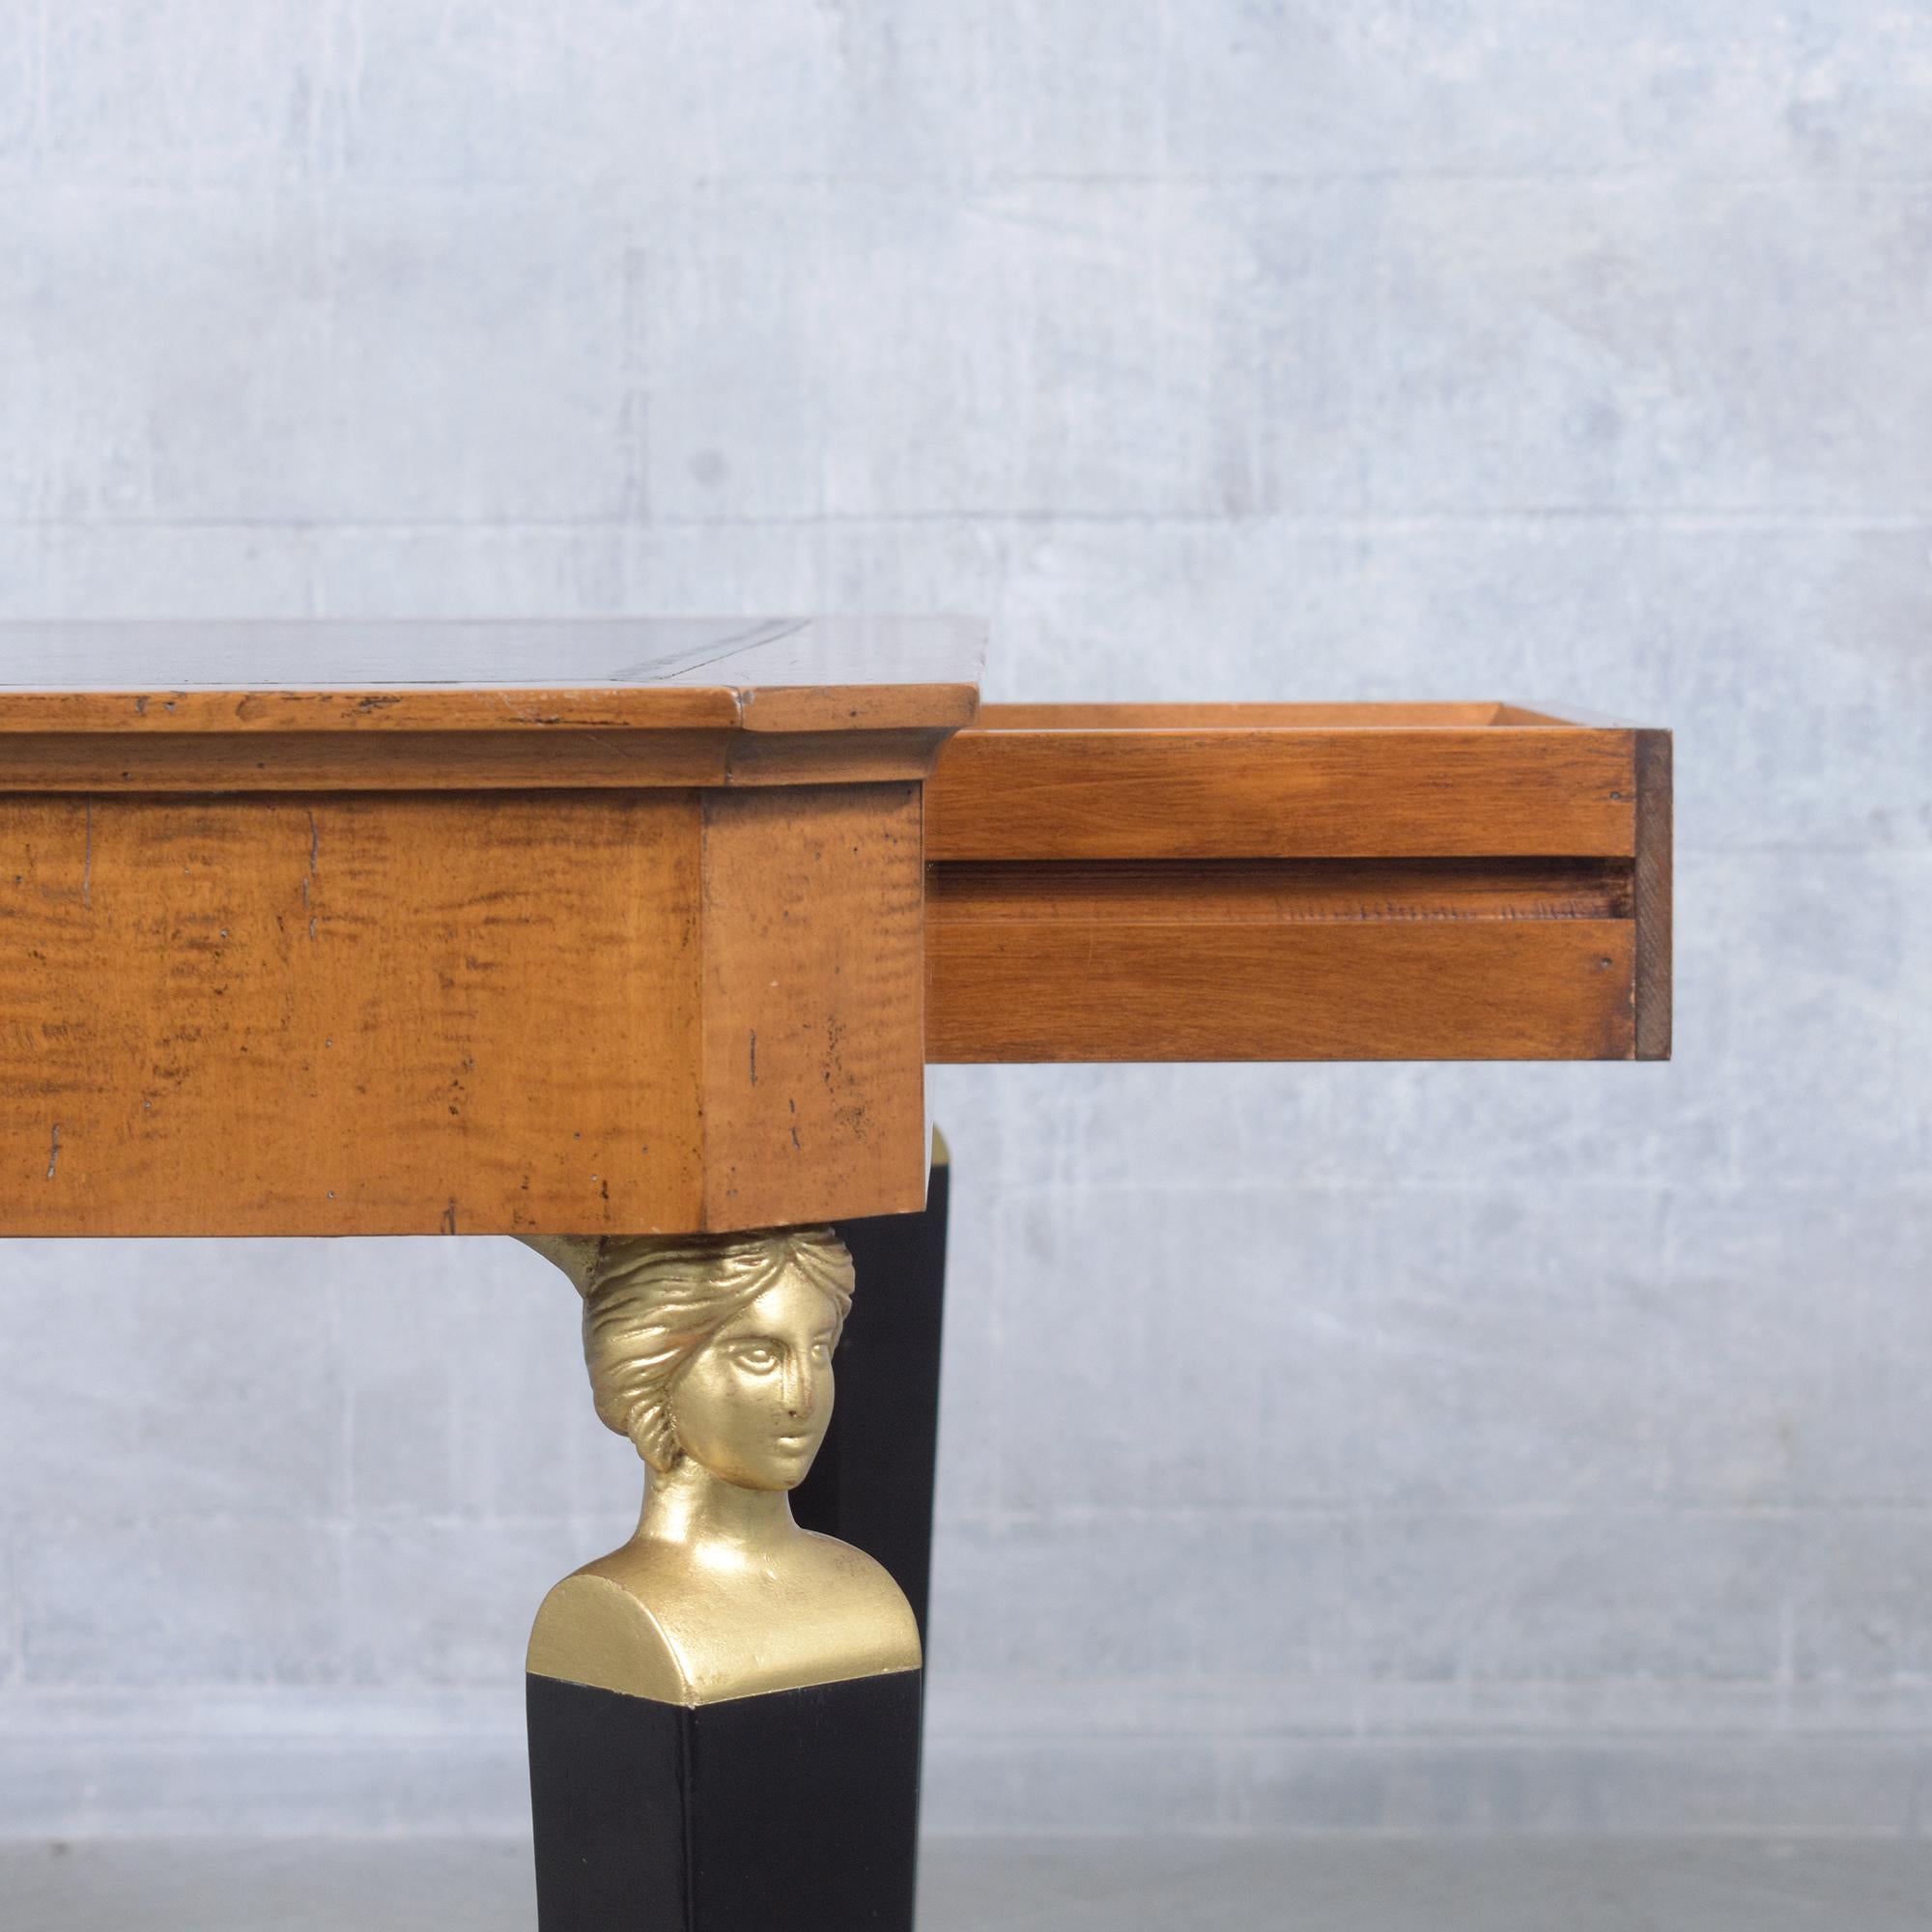 Restored 1970 Empire Desk: Light Walnut & Ebonized Finish with Green Leather Top For Sale 2